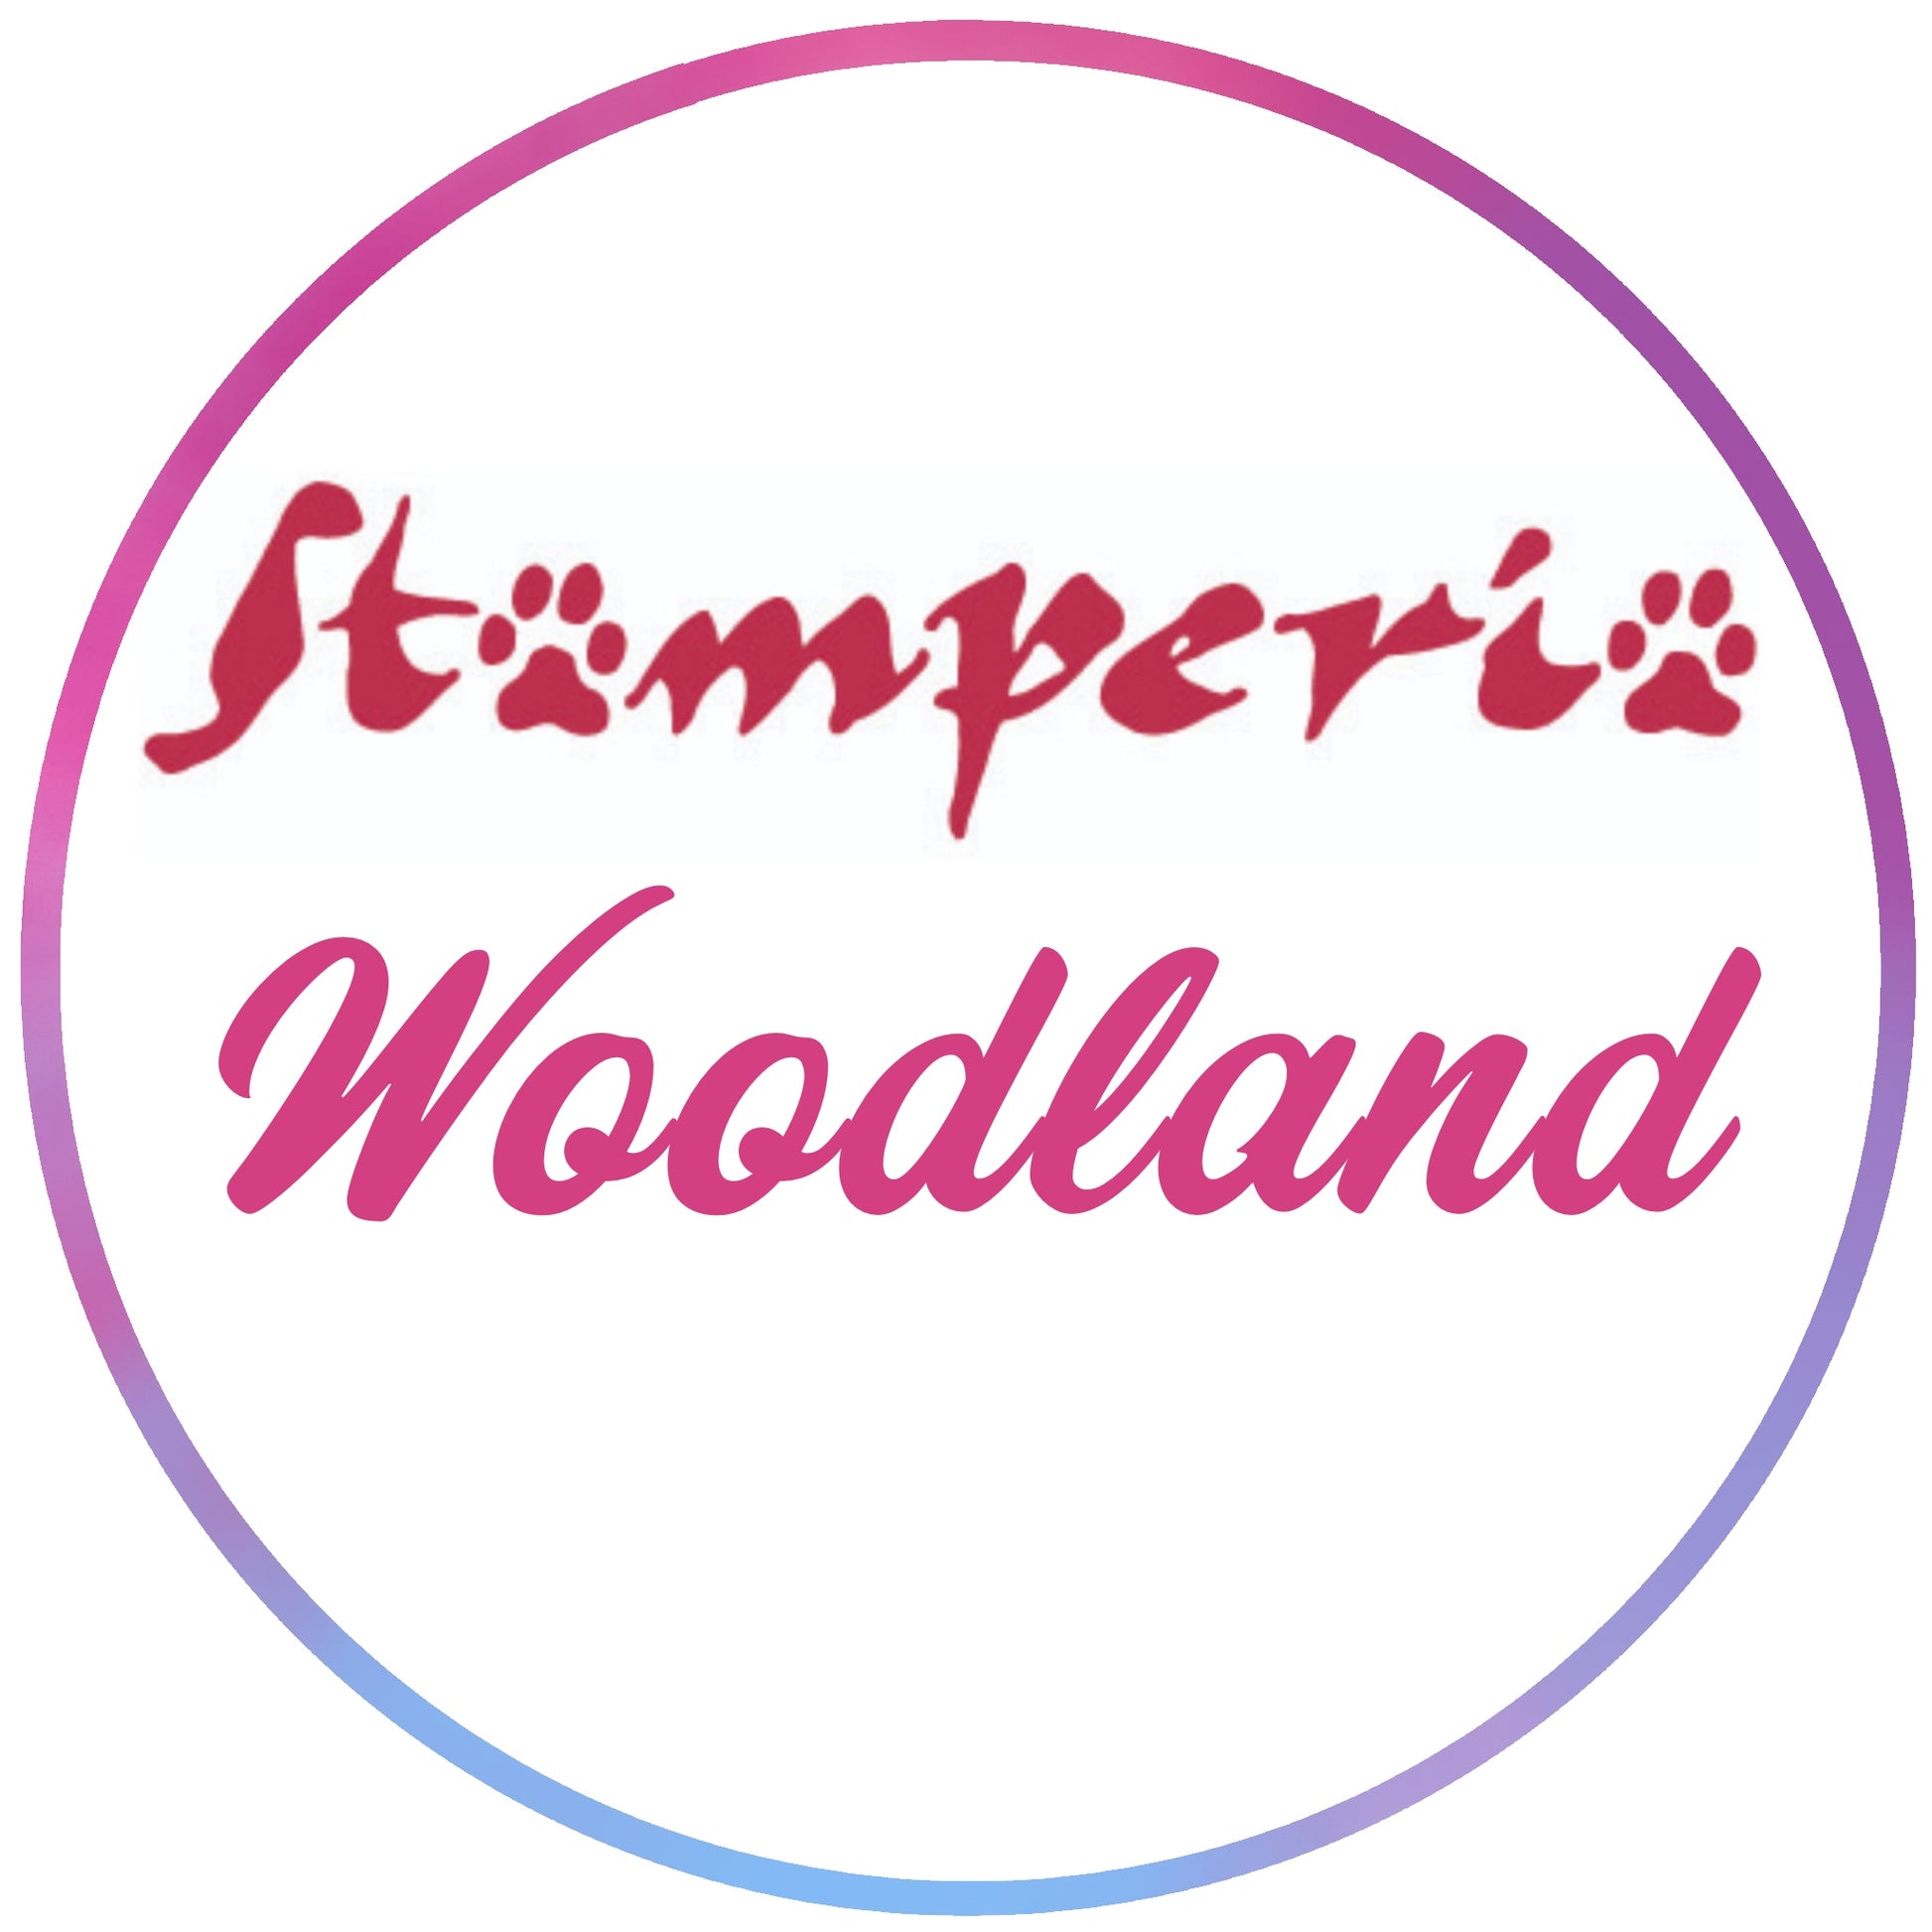 BUY IT ALL: Stamperia Woodland Collection – Kreative Kreations